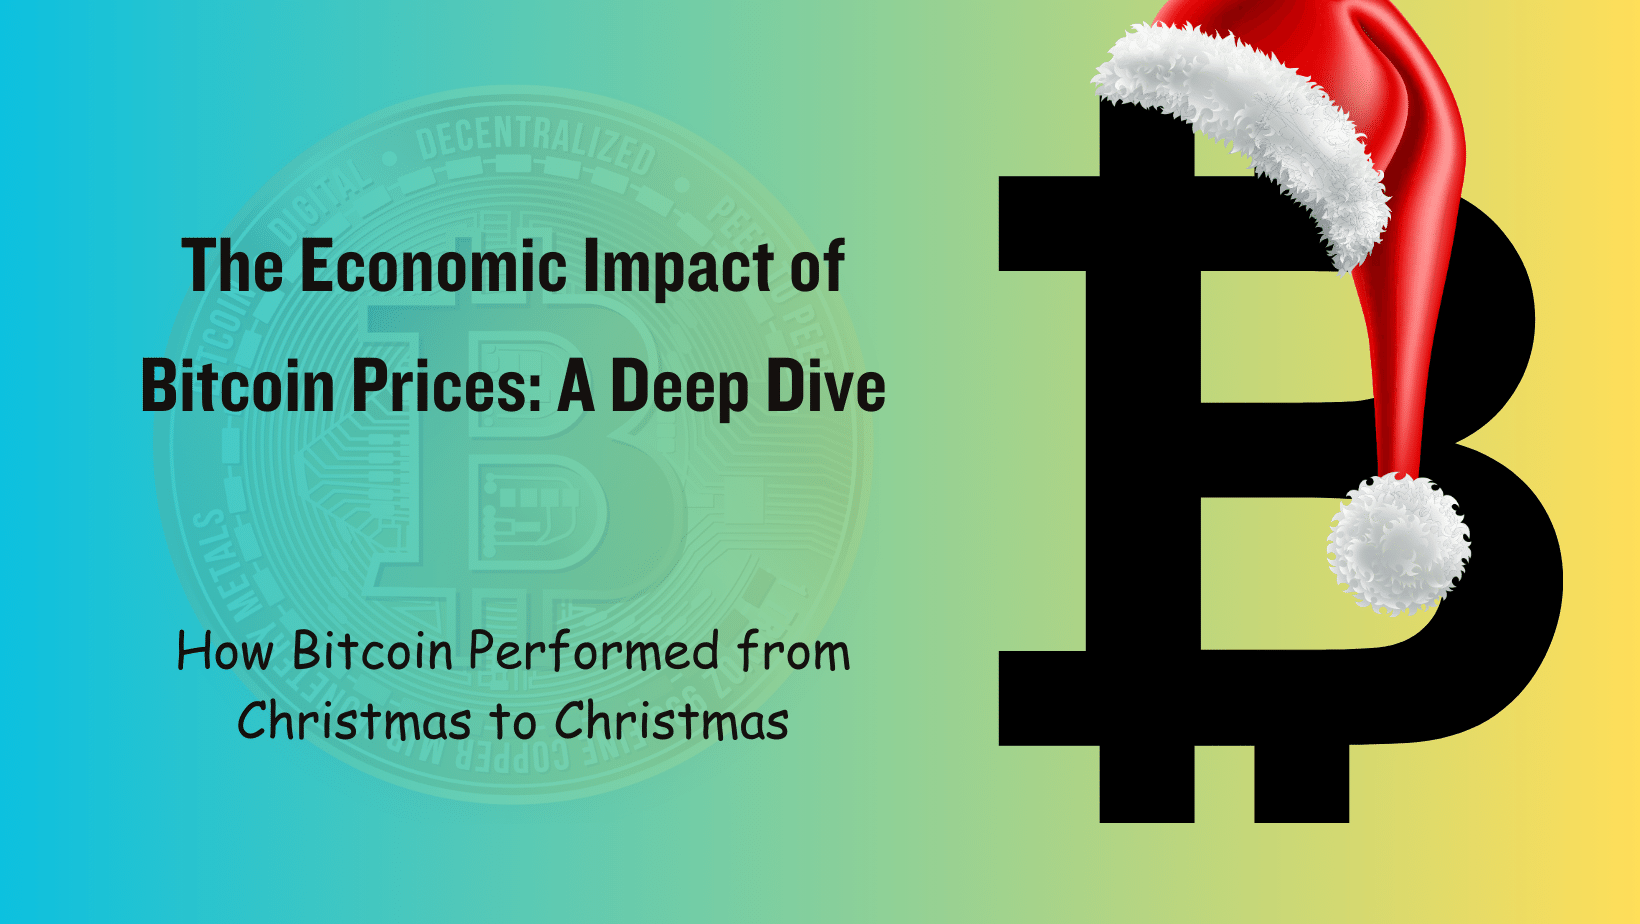 How Bitcoin Performed from Christmas to Christmas